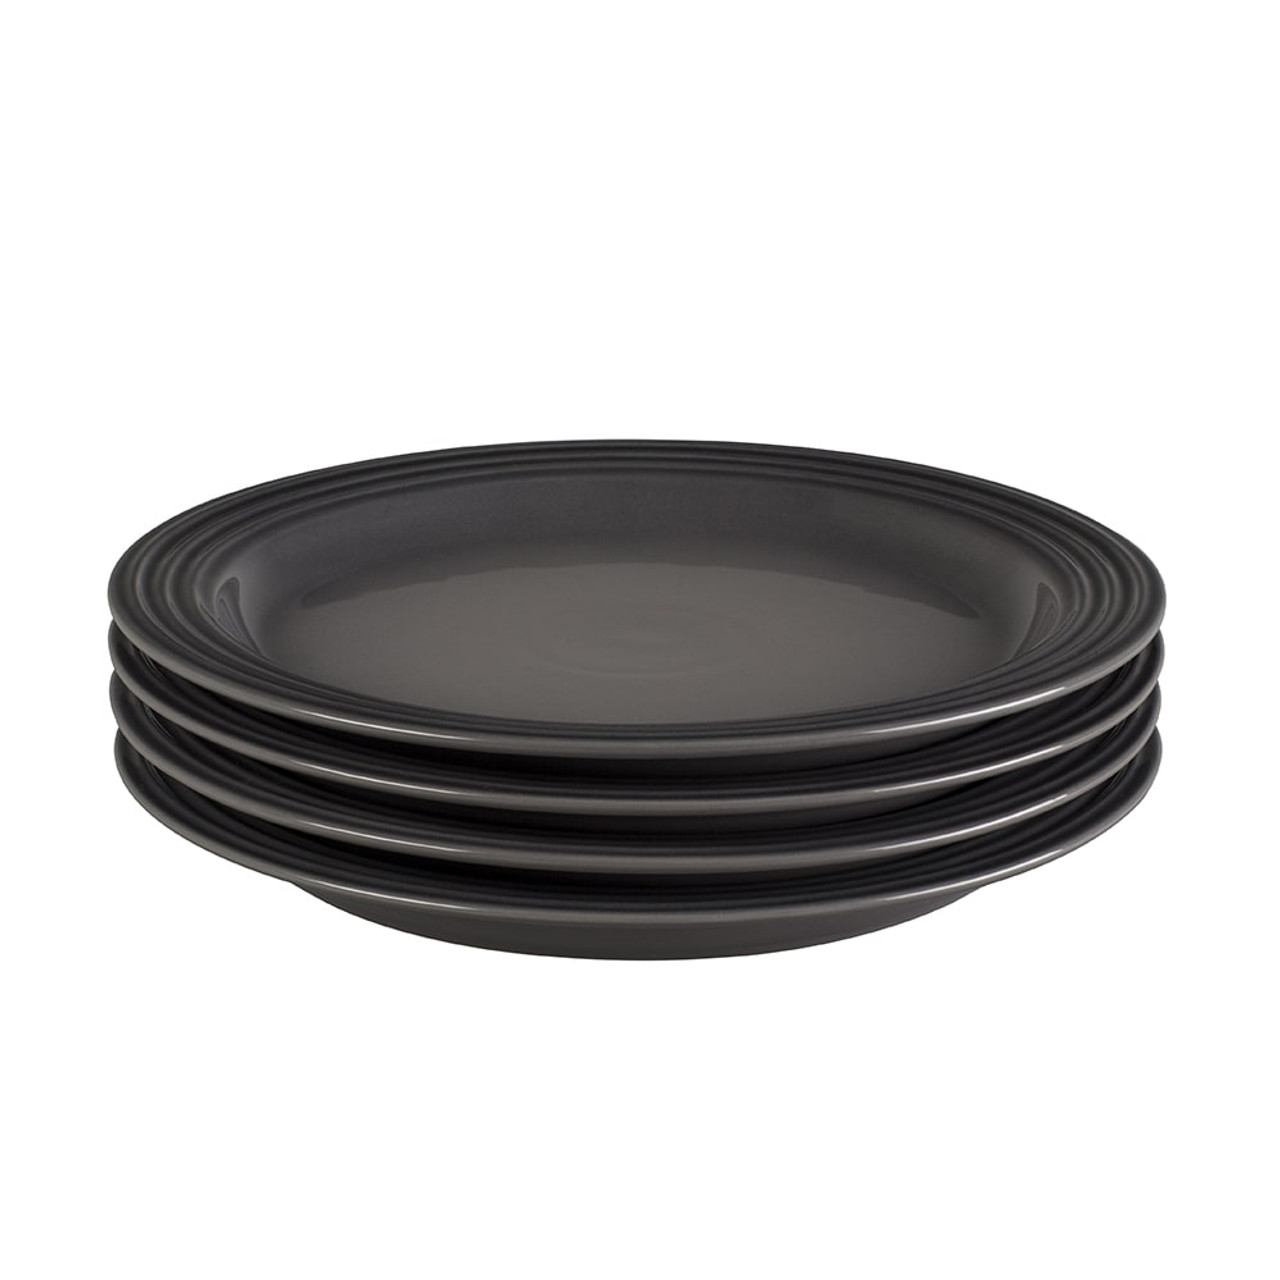 https://cdn11.bigcommerce.com/s-hccytny0od/images/stencil/1280x1280/products/2121/6878/le-creuset-dinner-plates-oyster-10-inch__78949.1539816280.jpg?c=2?imbypass=on